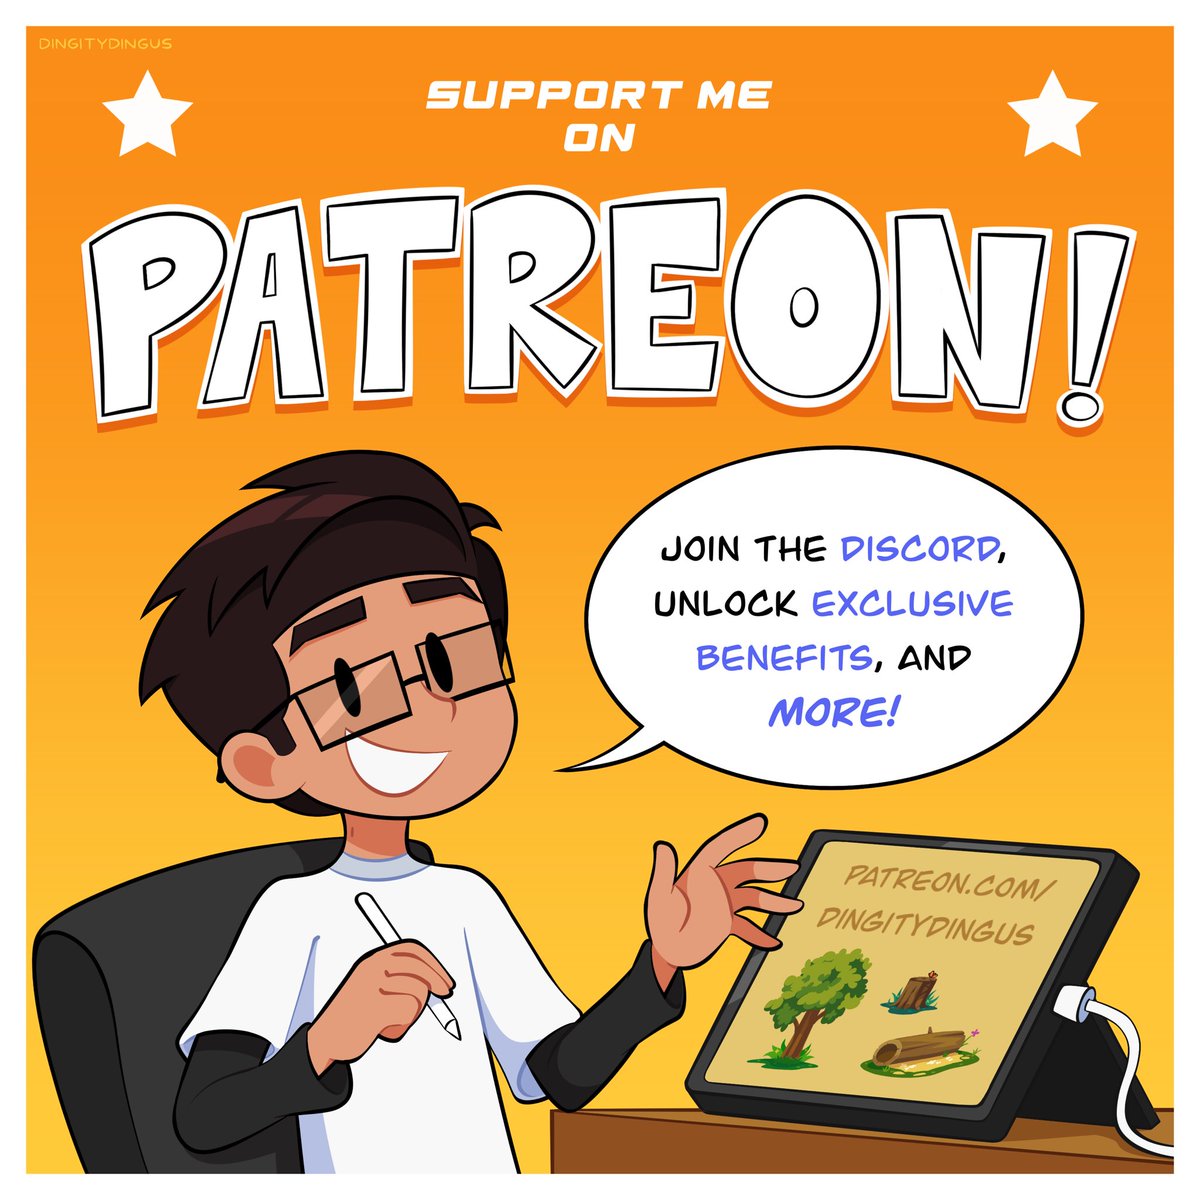 Patreon Promo! ⭐️

If you'd like to help me with my art journey, see more of my work, and maybe join a small community of supporters, this is a neat little way to do so!

#Patreon #Discord #OriginalArt 